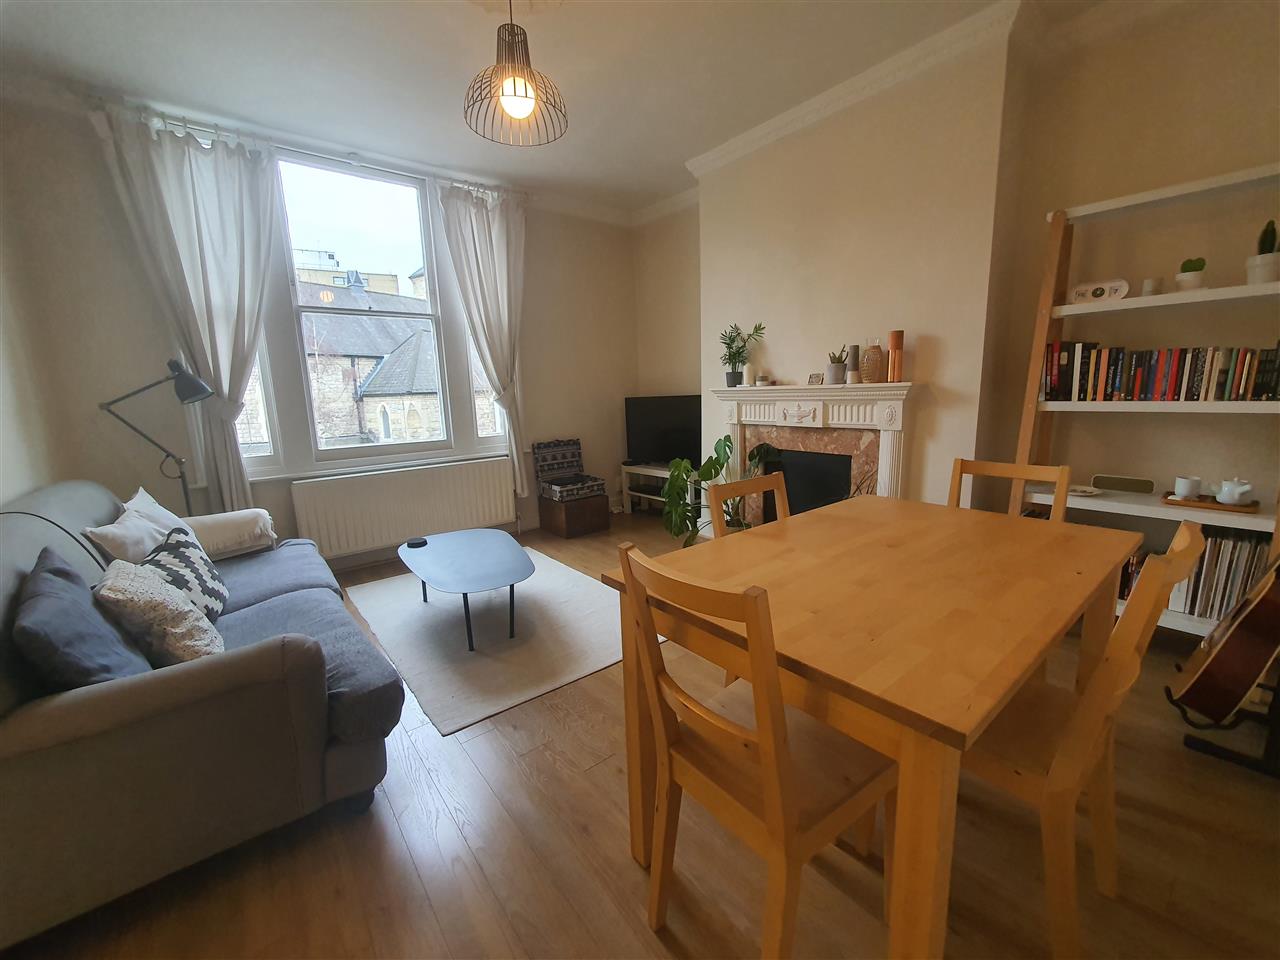 AVAILABLE 2ND APRIL 2022 (possibly sooner). We are pleased to offer this well presented PART FURNISHED first floor converted flat within walking distance of Tufnell Park tube station and the public transport/amenities of Holloway Road. The accommodation comprises one double bedroom, well sized ...